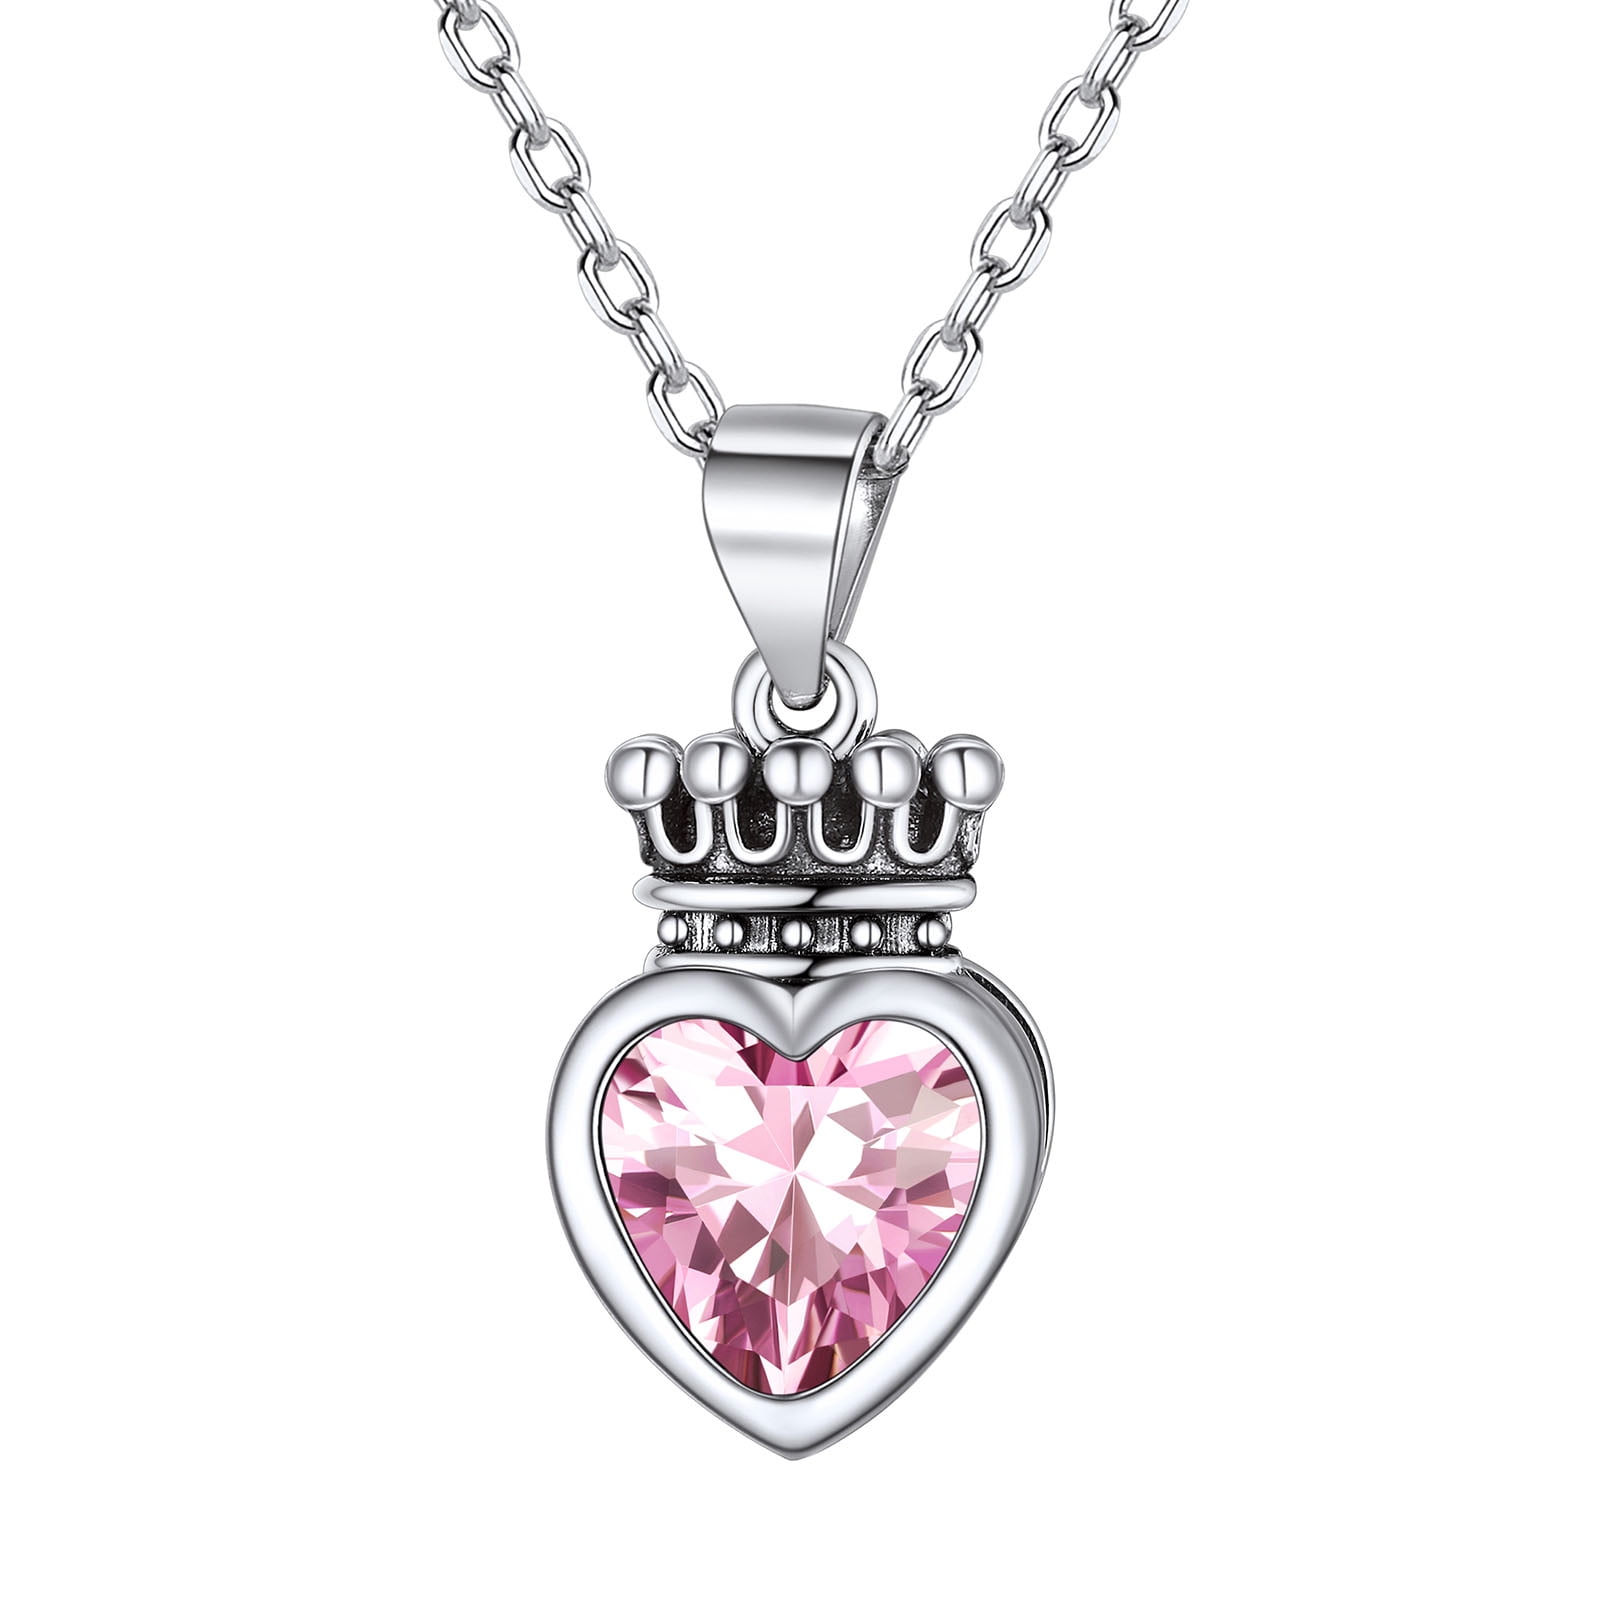 ChicSilver Princess Queen Crown Necklace for Women Girls